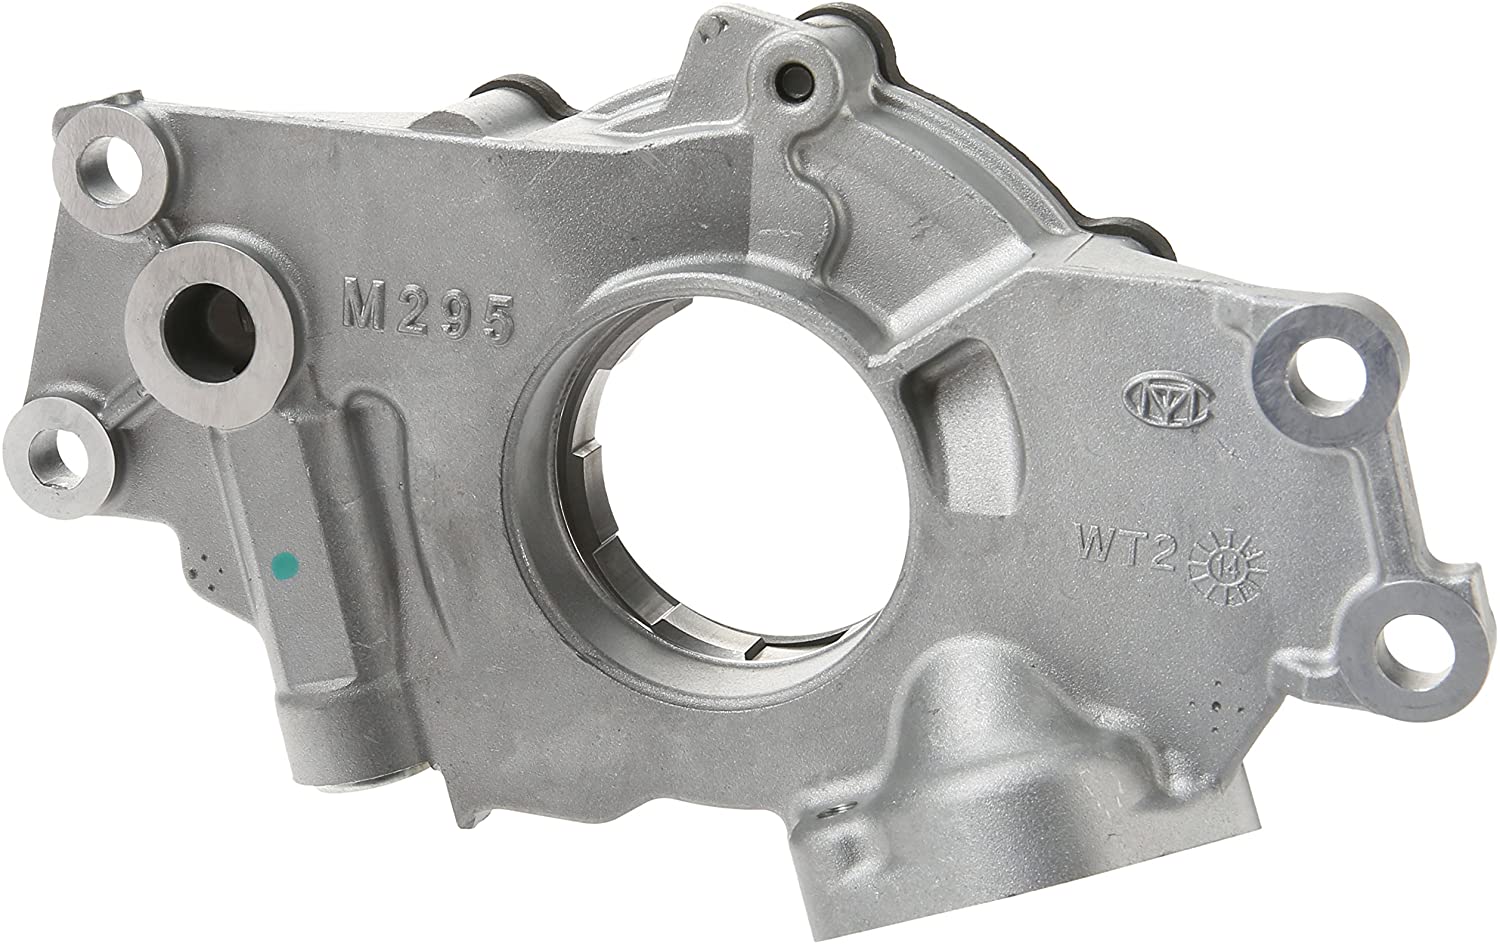 Melling M295 Replacement Oil Pump